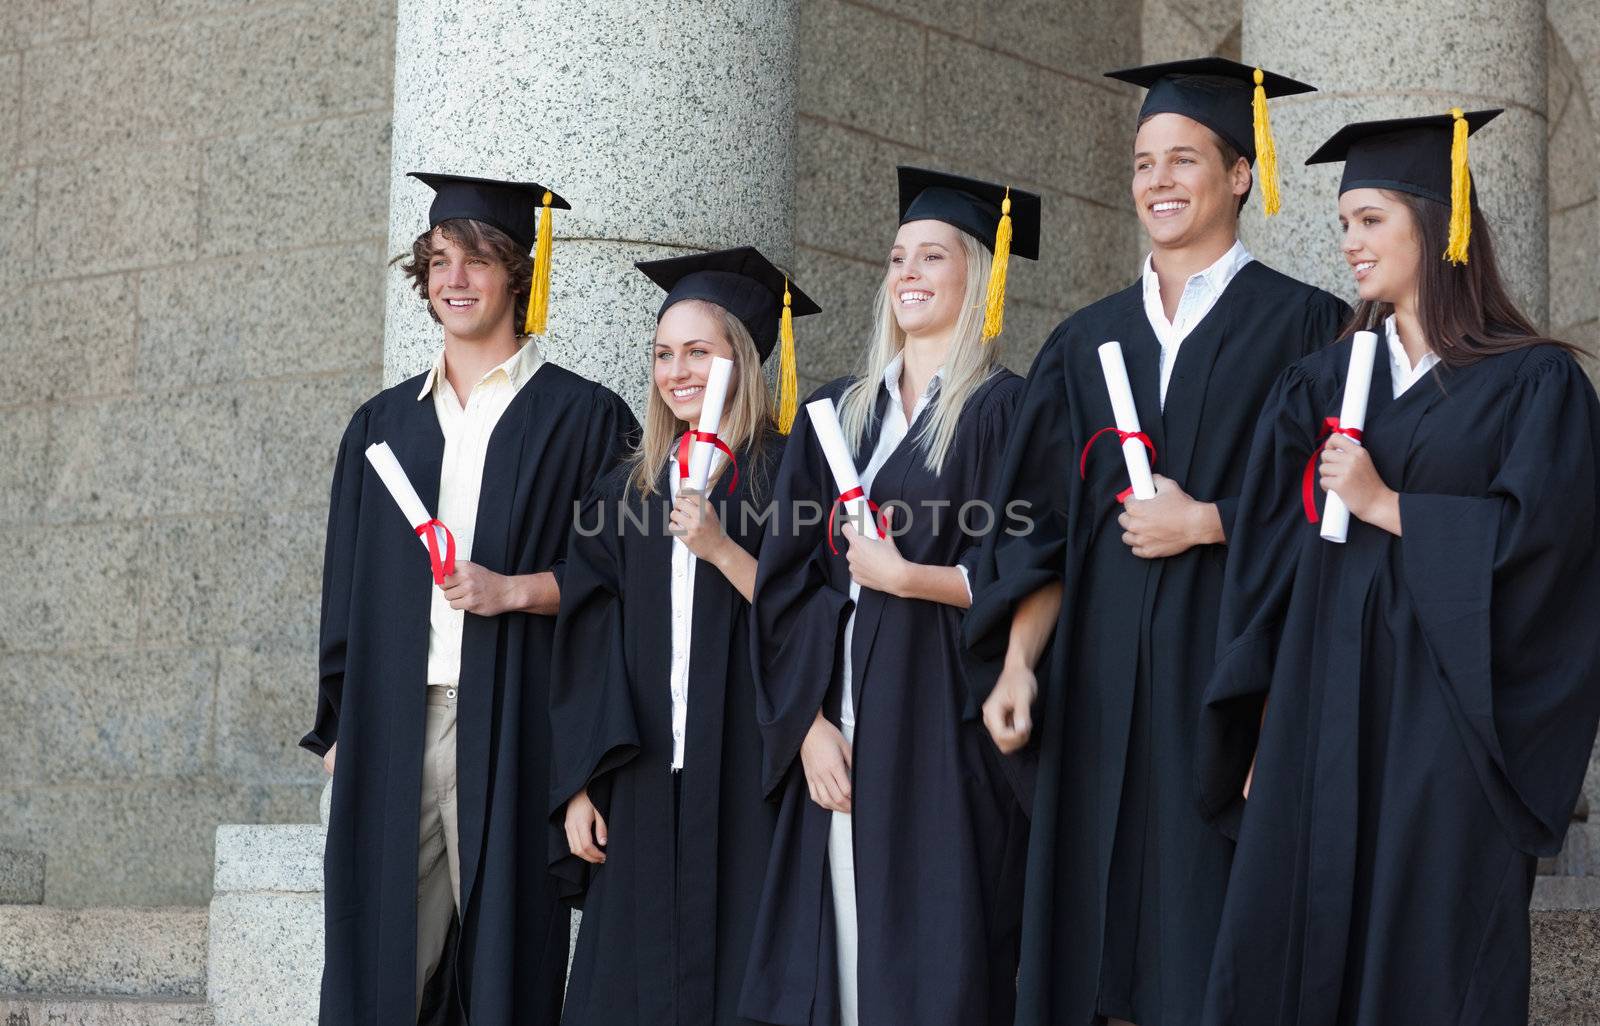 Smiling graduates posing while holding their diploma in front of the university